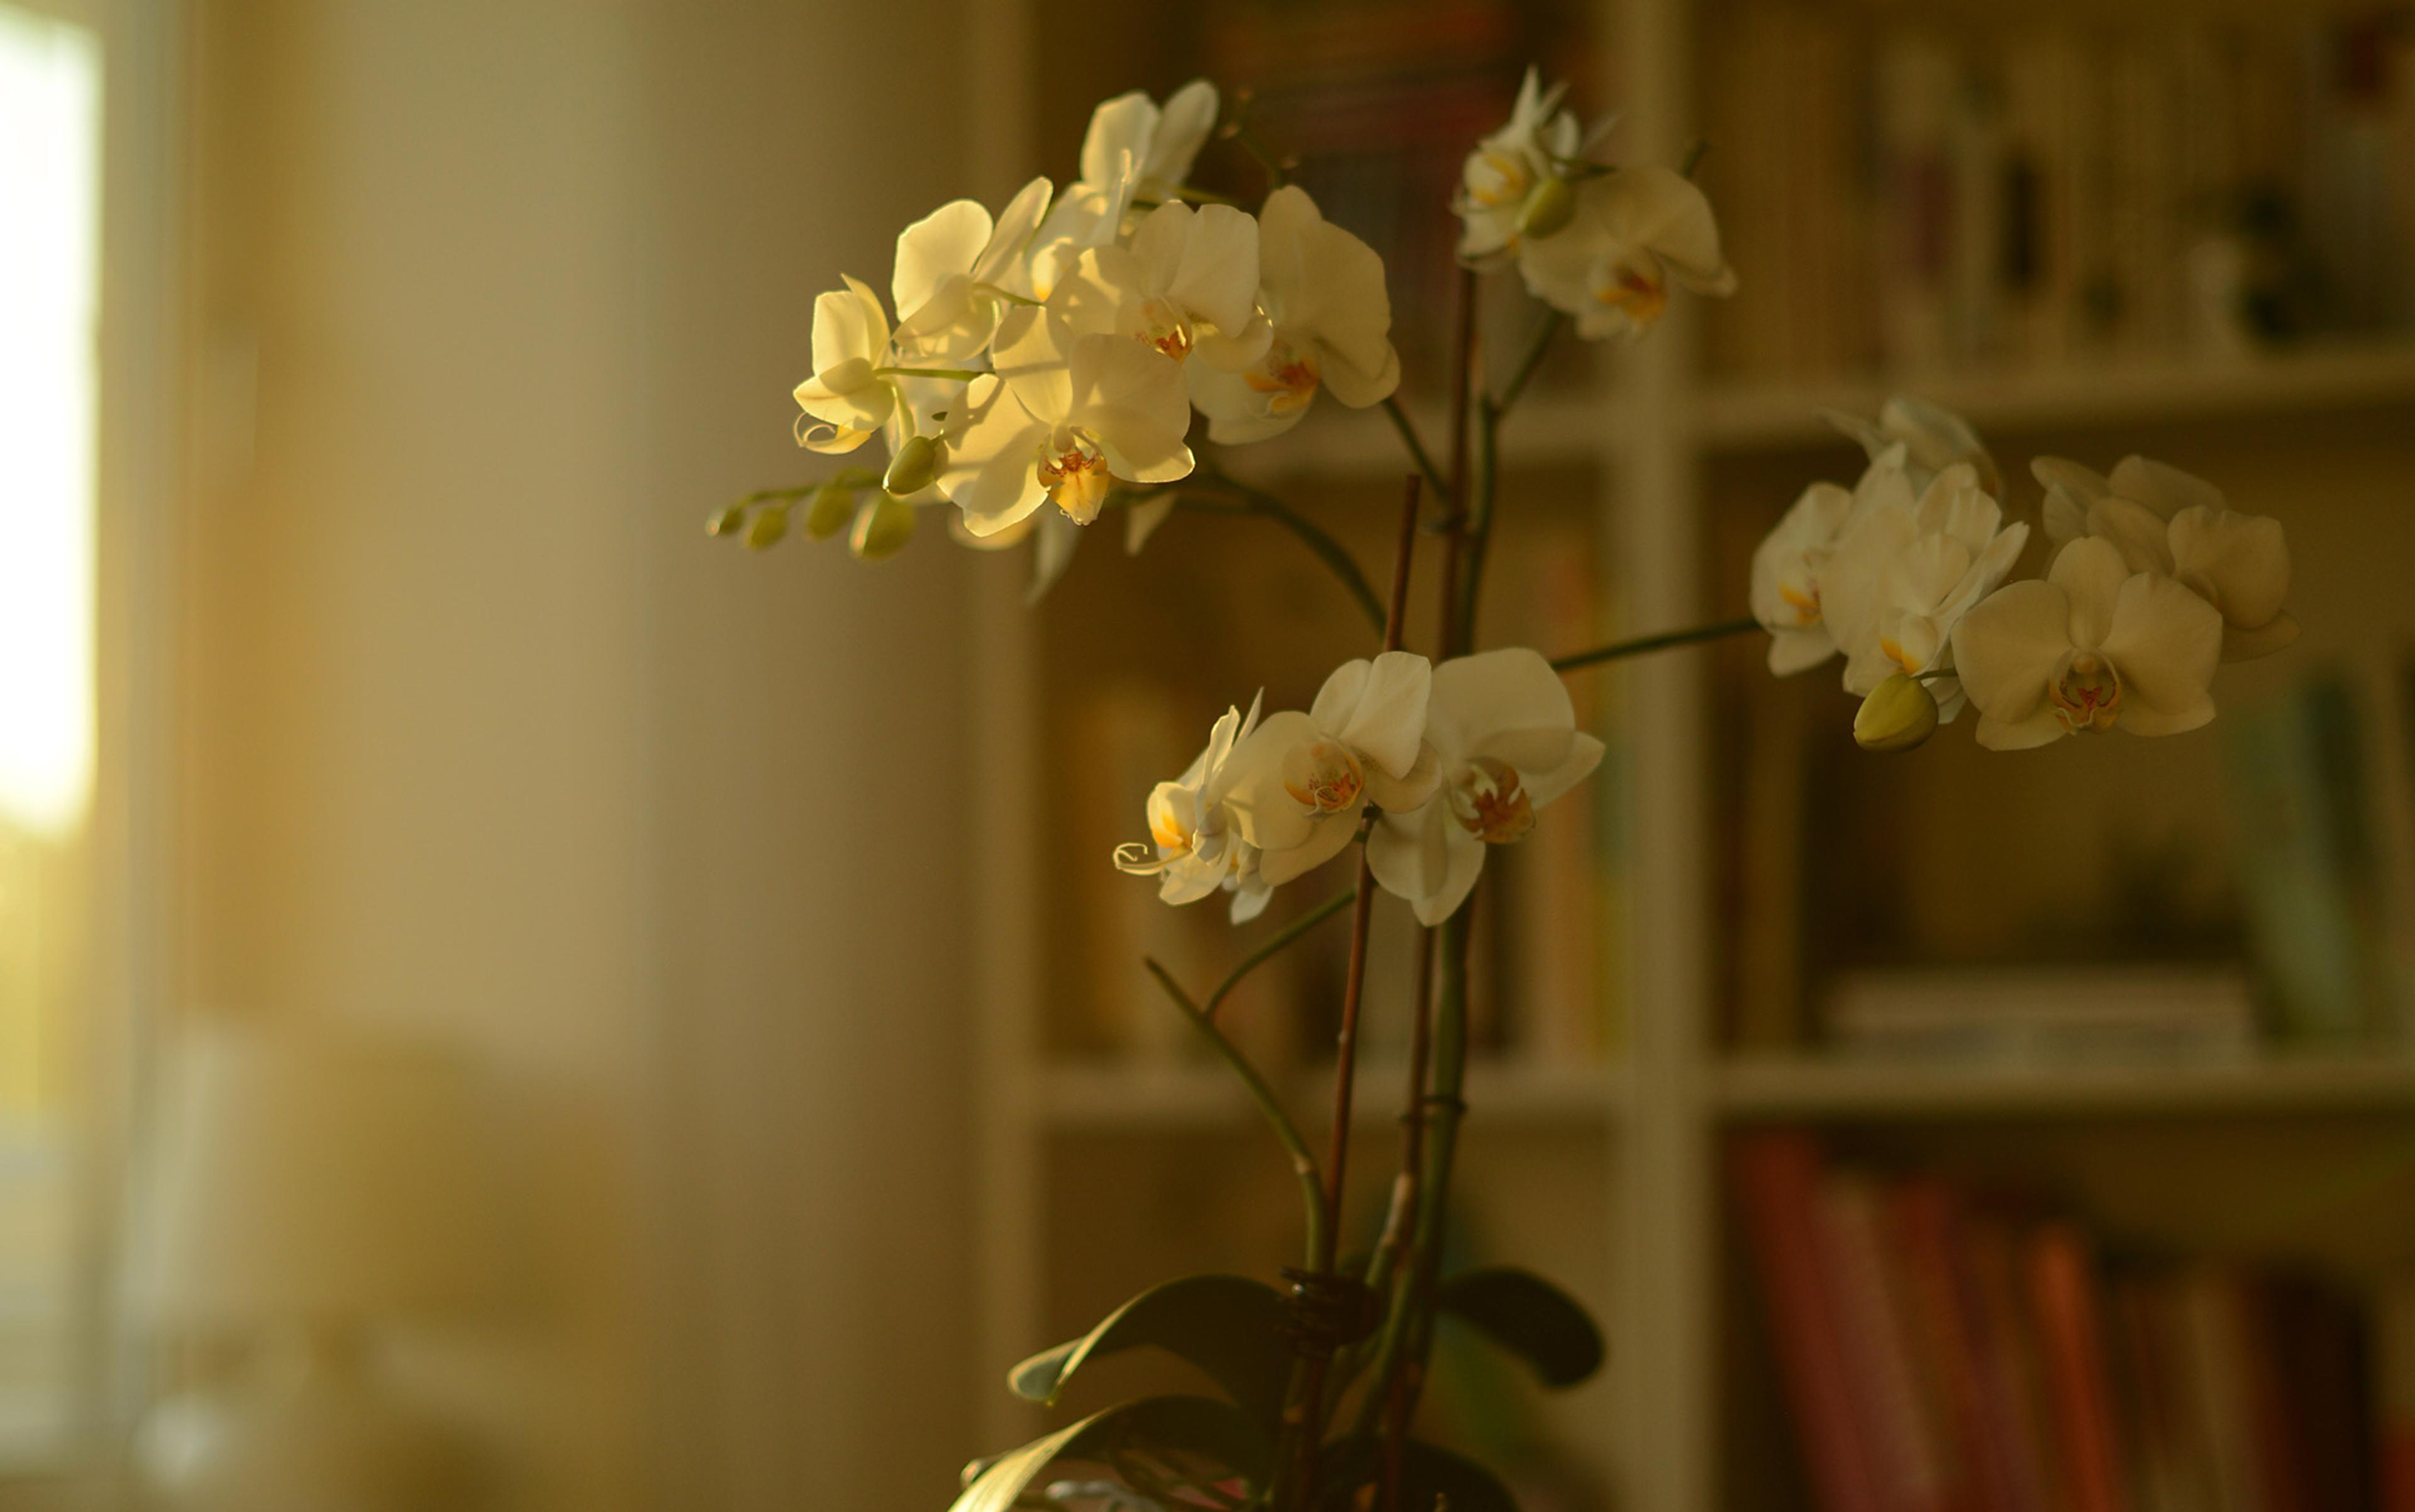 A yellow orchid flower in a vase is lit by sunlight from a side window in a living room. The background is out of focus